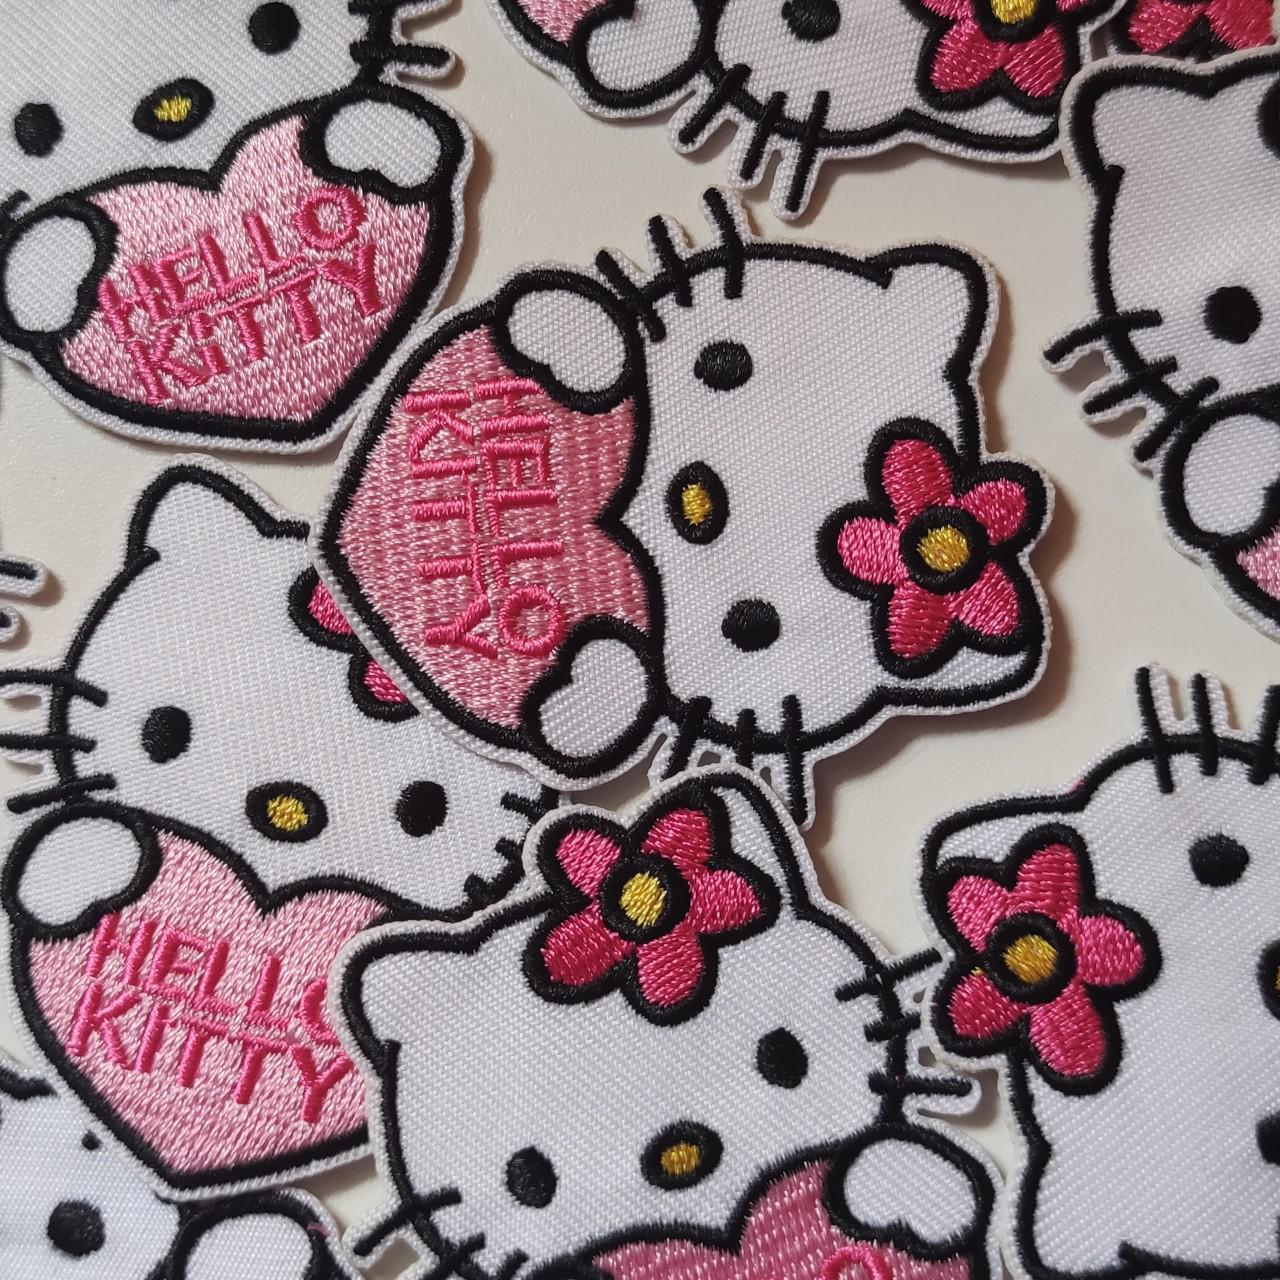 My aunt made me a bunch of hello kitty patches to - Depop